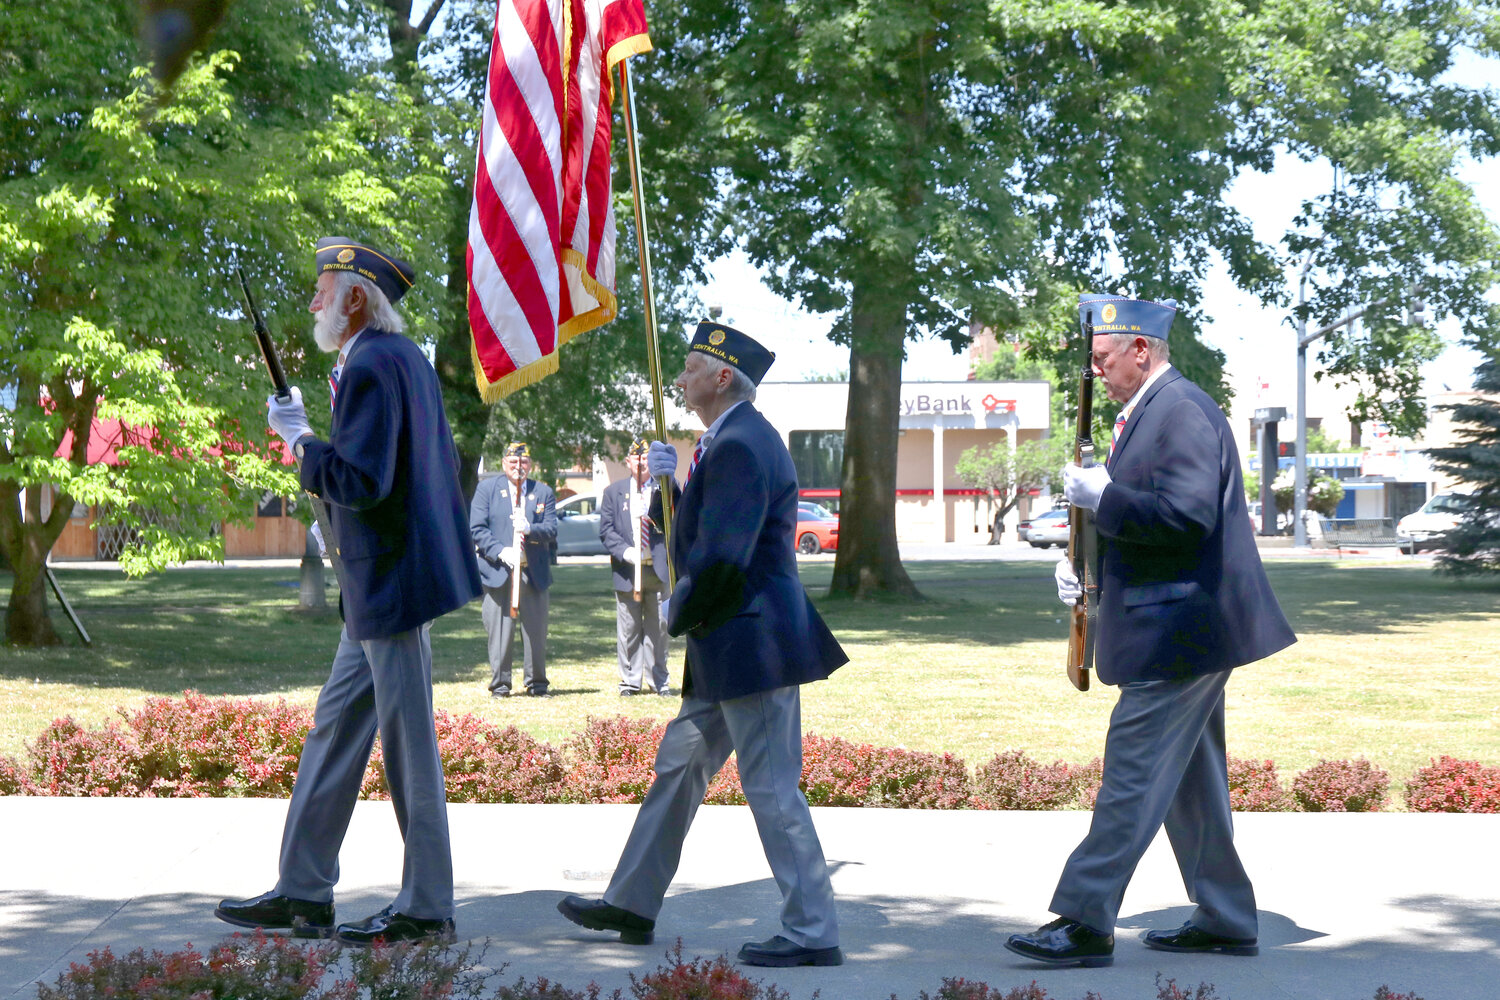 Members of American Legion Grant Hodge Post 217 stand during a Memorial Day ceremony at George Washington Park in Centralia Monday.